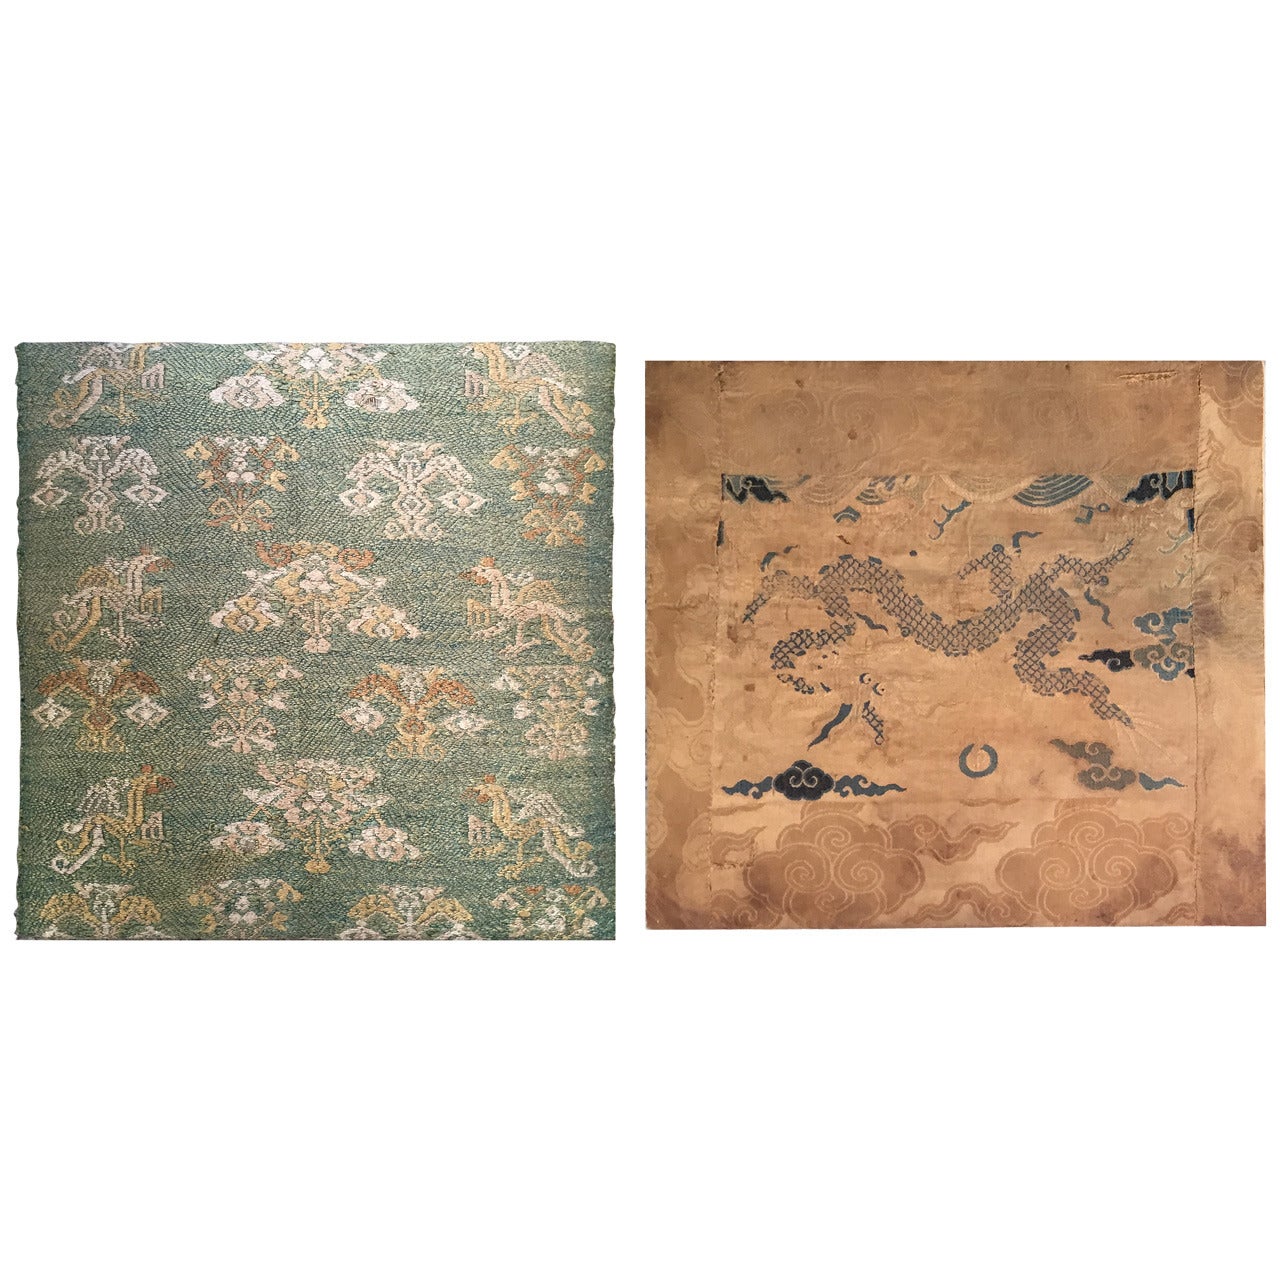 Antique and Rare Chinese Silk Fragments For Sale